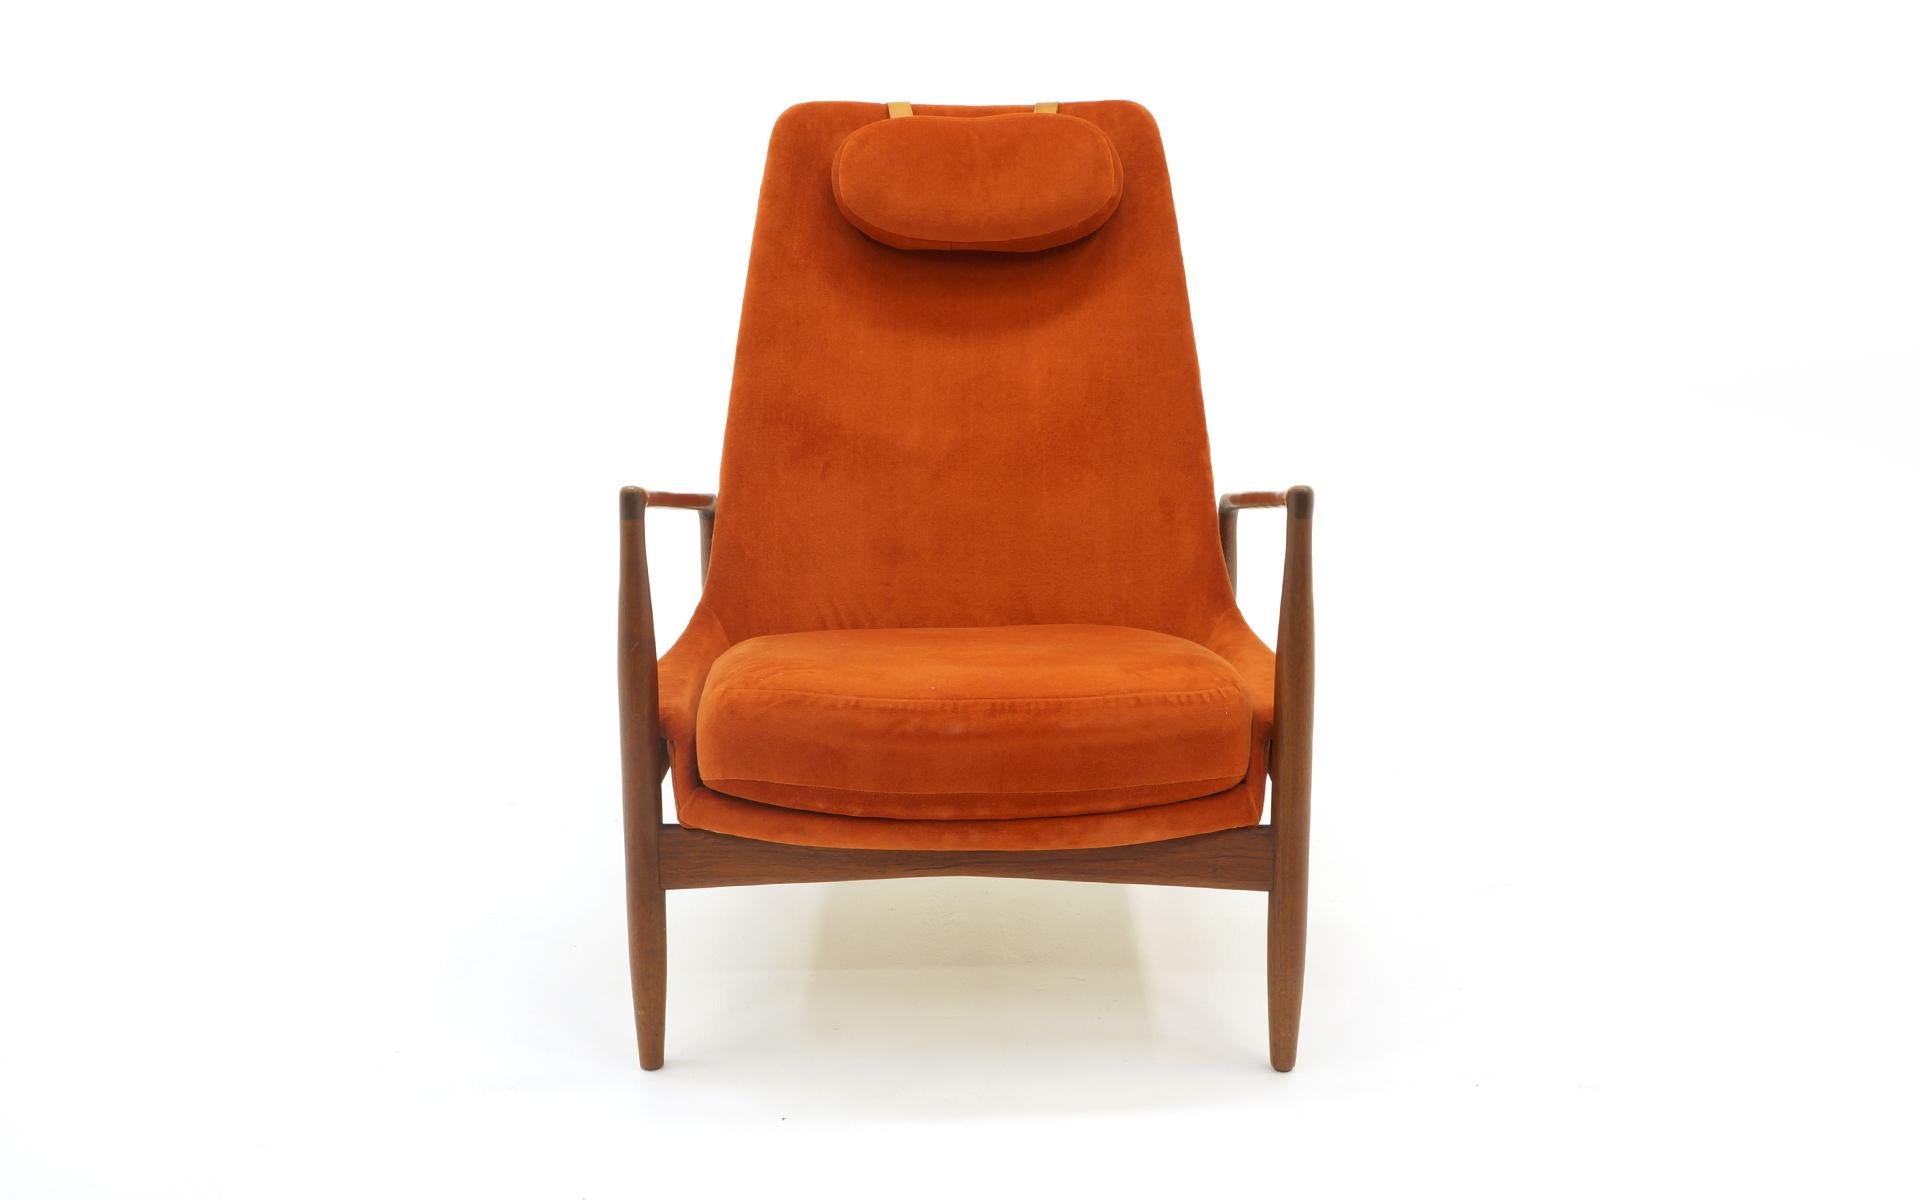 High Back Seal or Sälen Lounge Chair by Kofod-Larsen for OPE, Sweden, 1960. 1